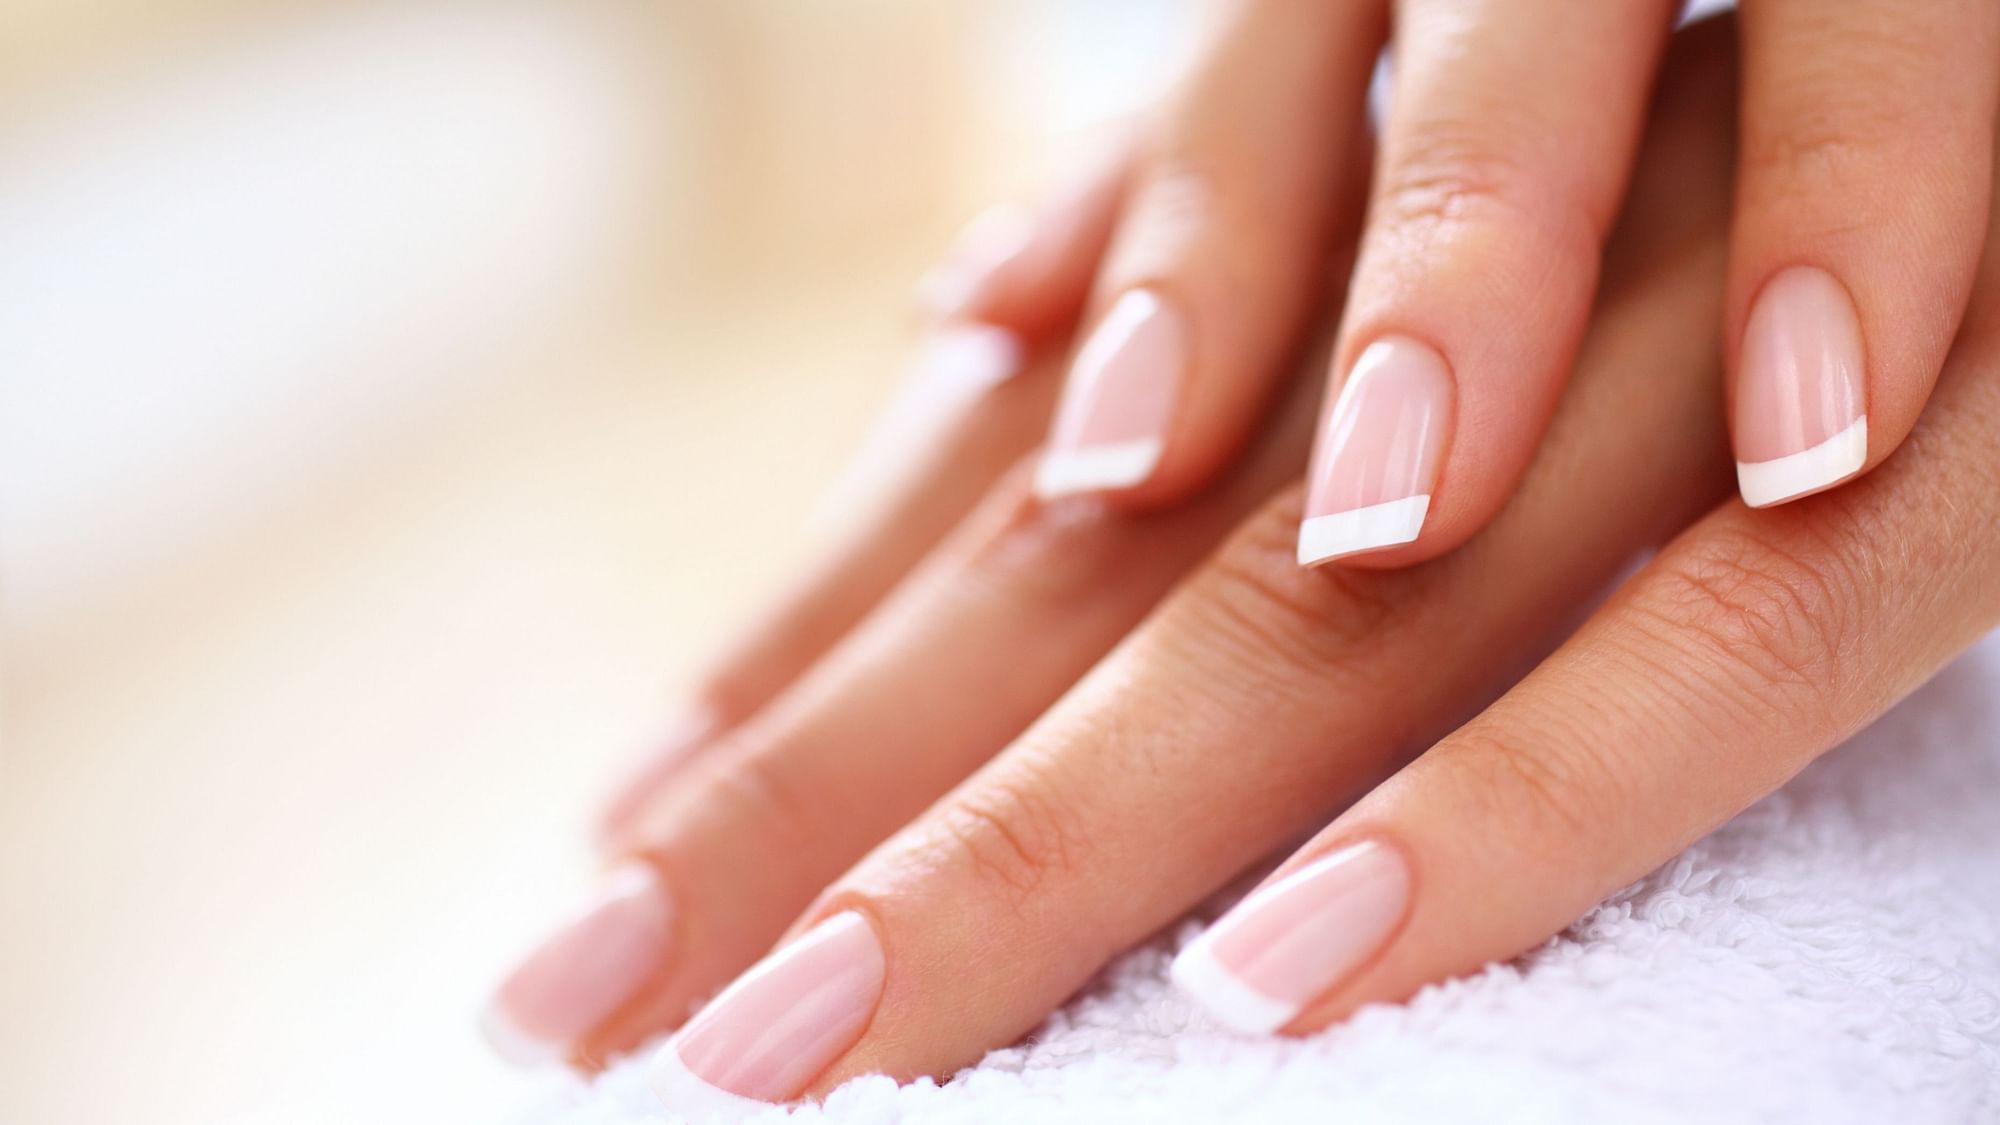 How to take care of your nails? Find out.